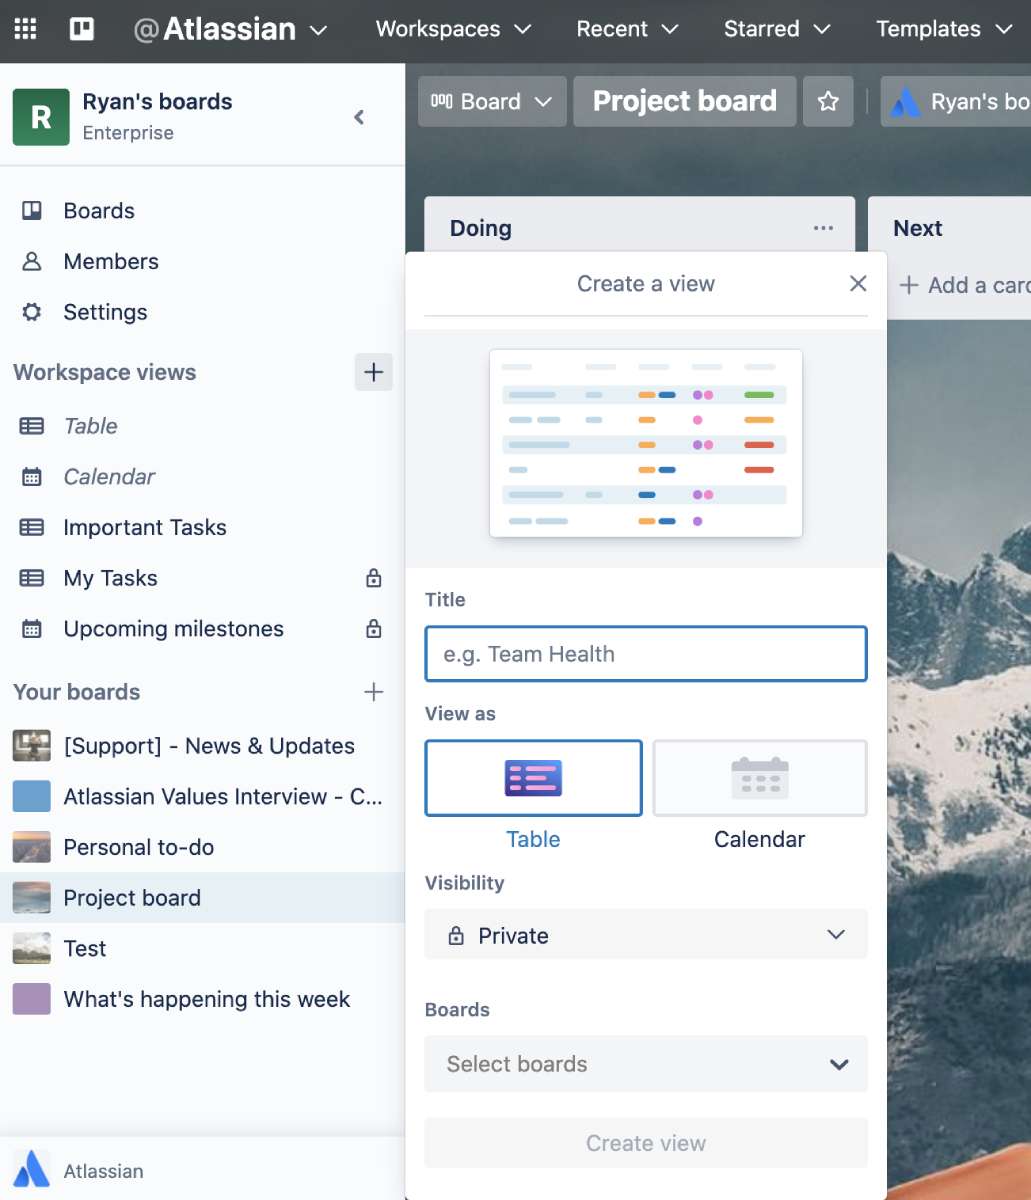 Trello board showing a side panel containing a list of workspace views and boards and a dialog box for “Creating a view”.